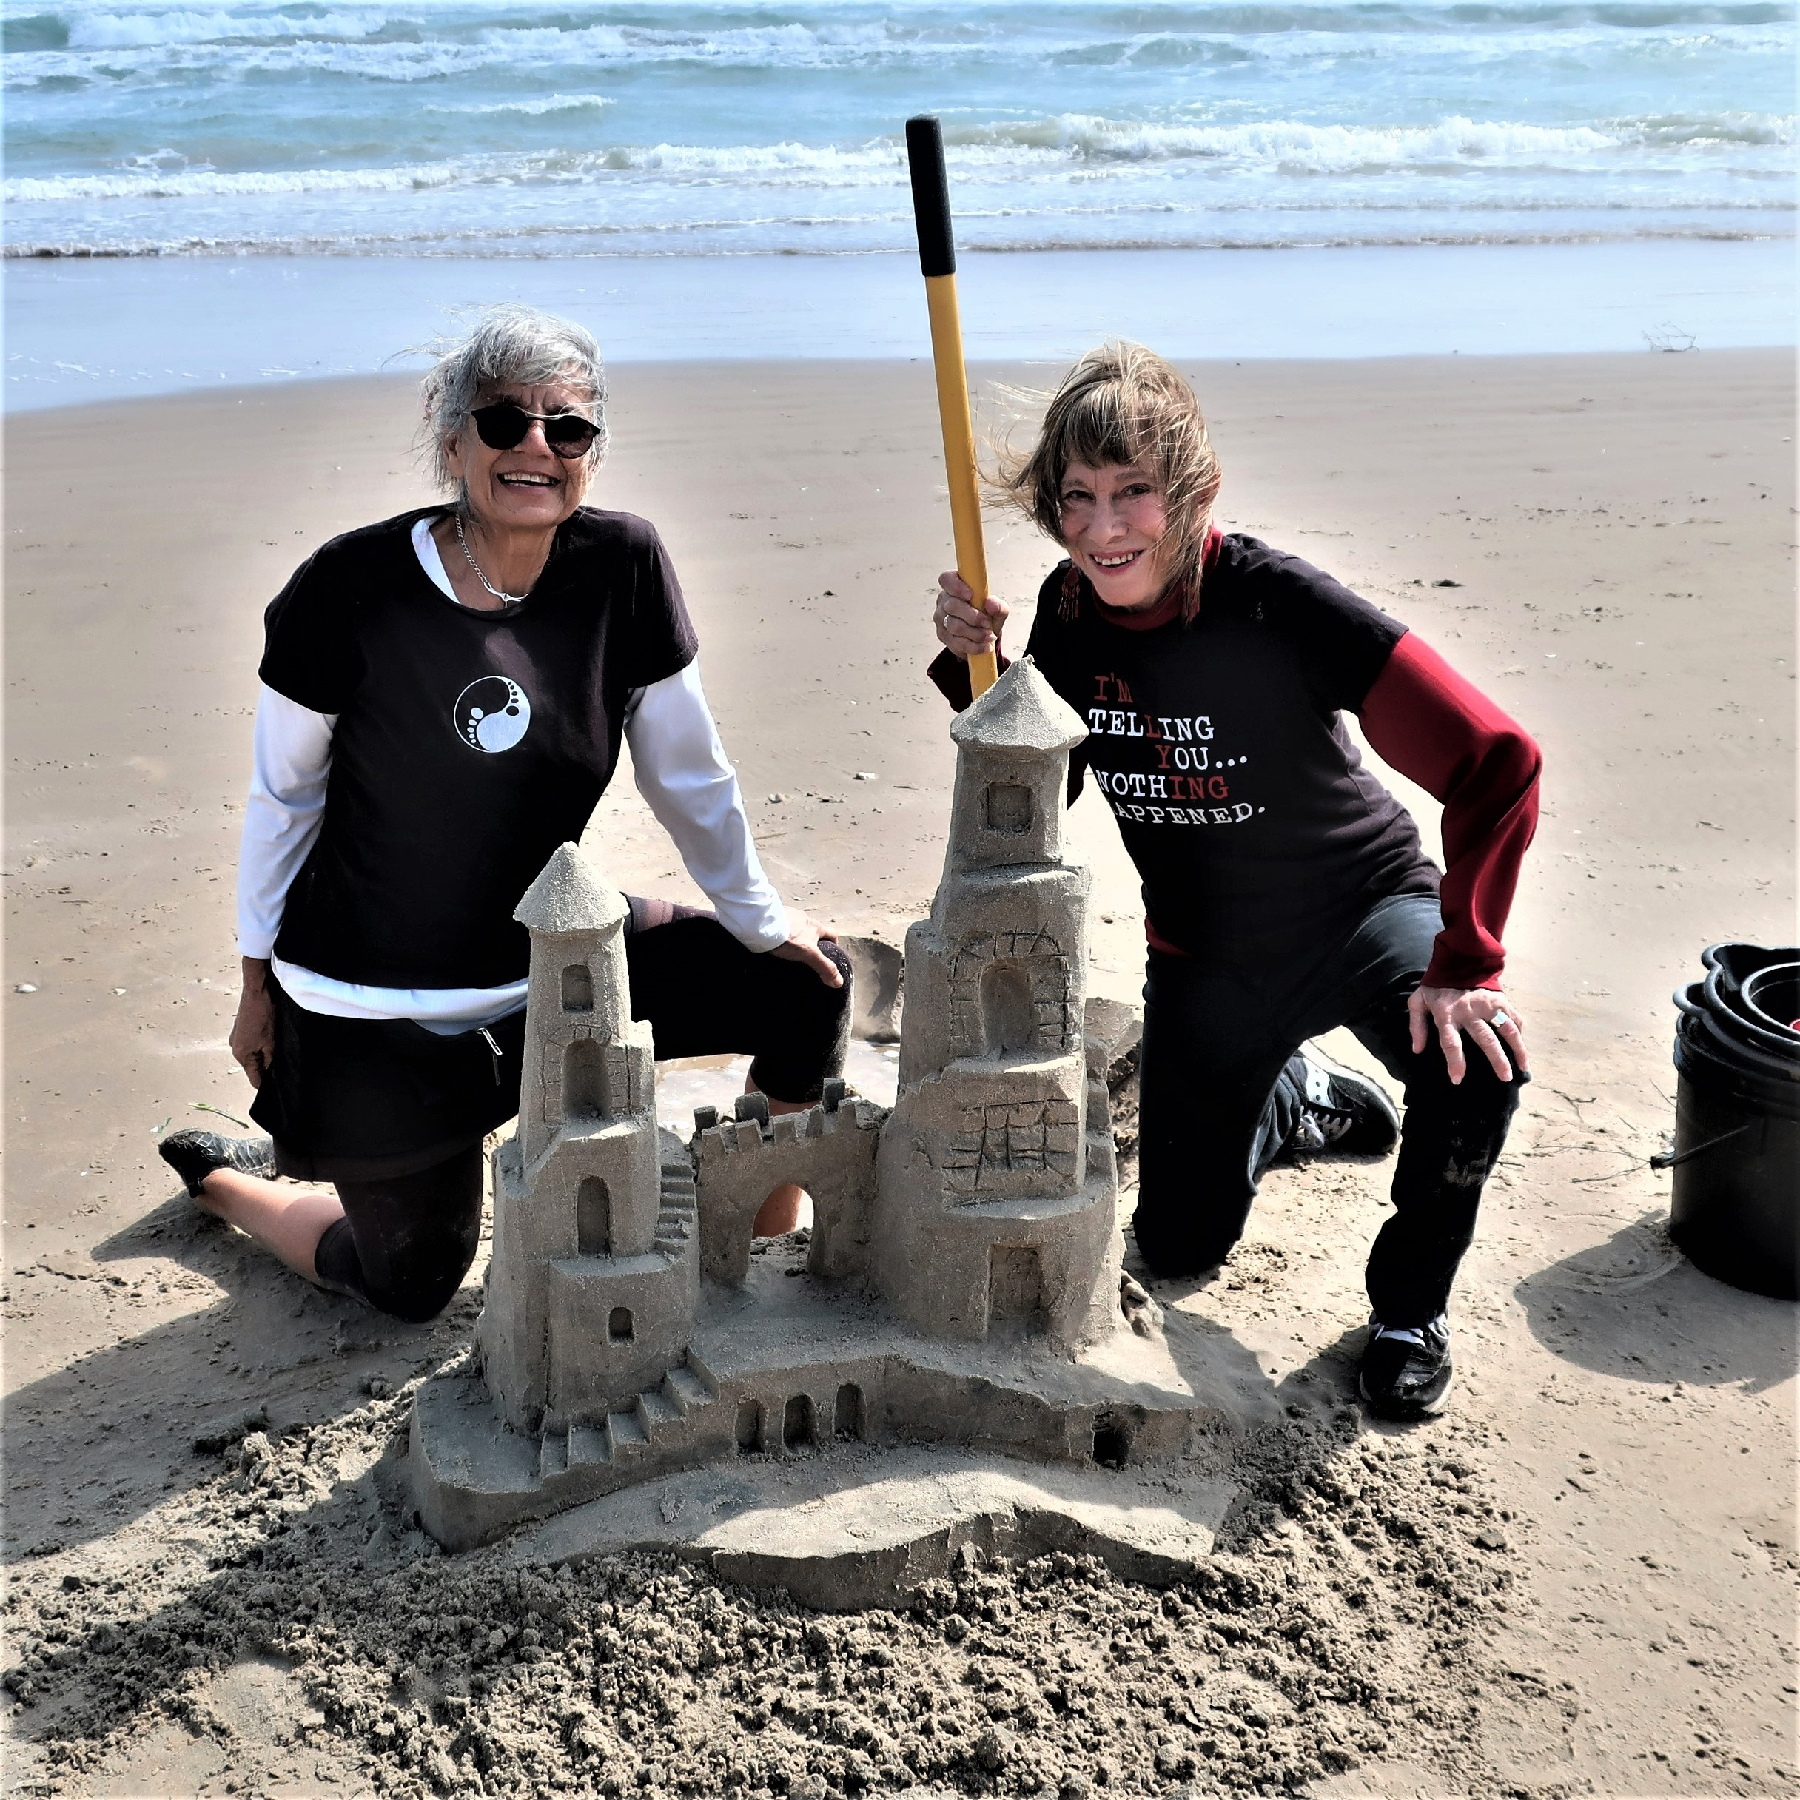 Lucinda Wierenga (left) gives the author a lesson in how to build a sandcastle on South Padre Island, Texas.